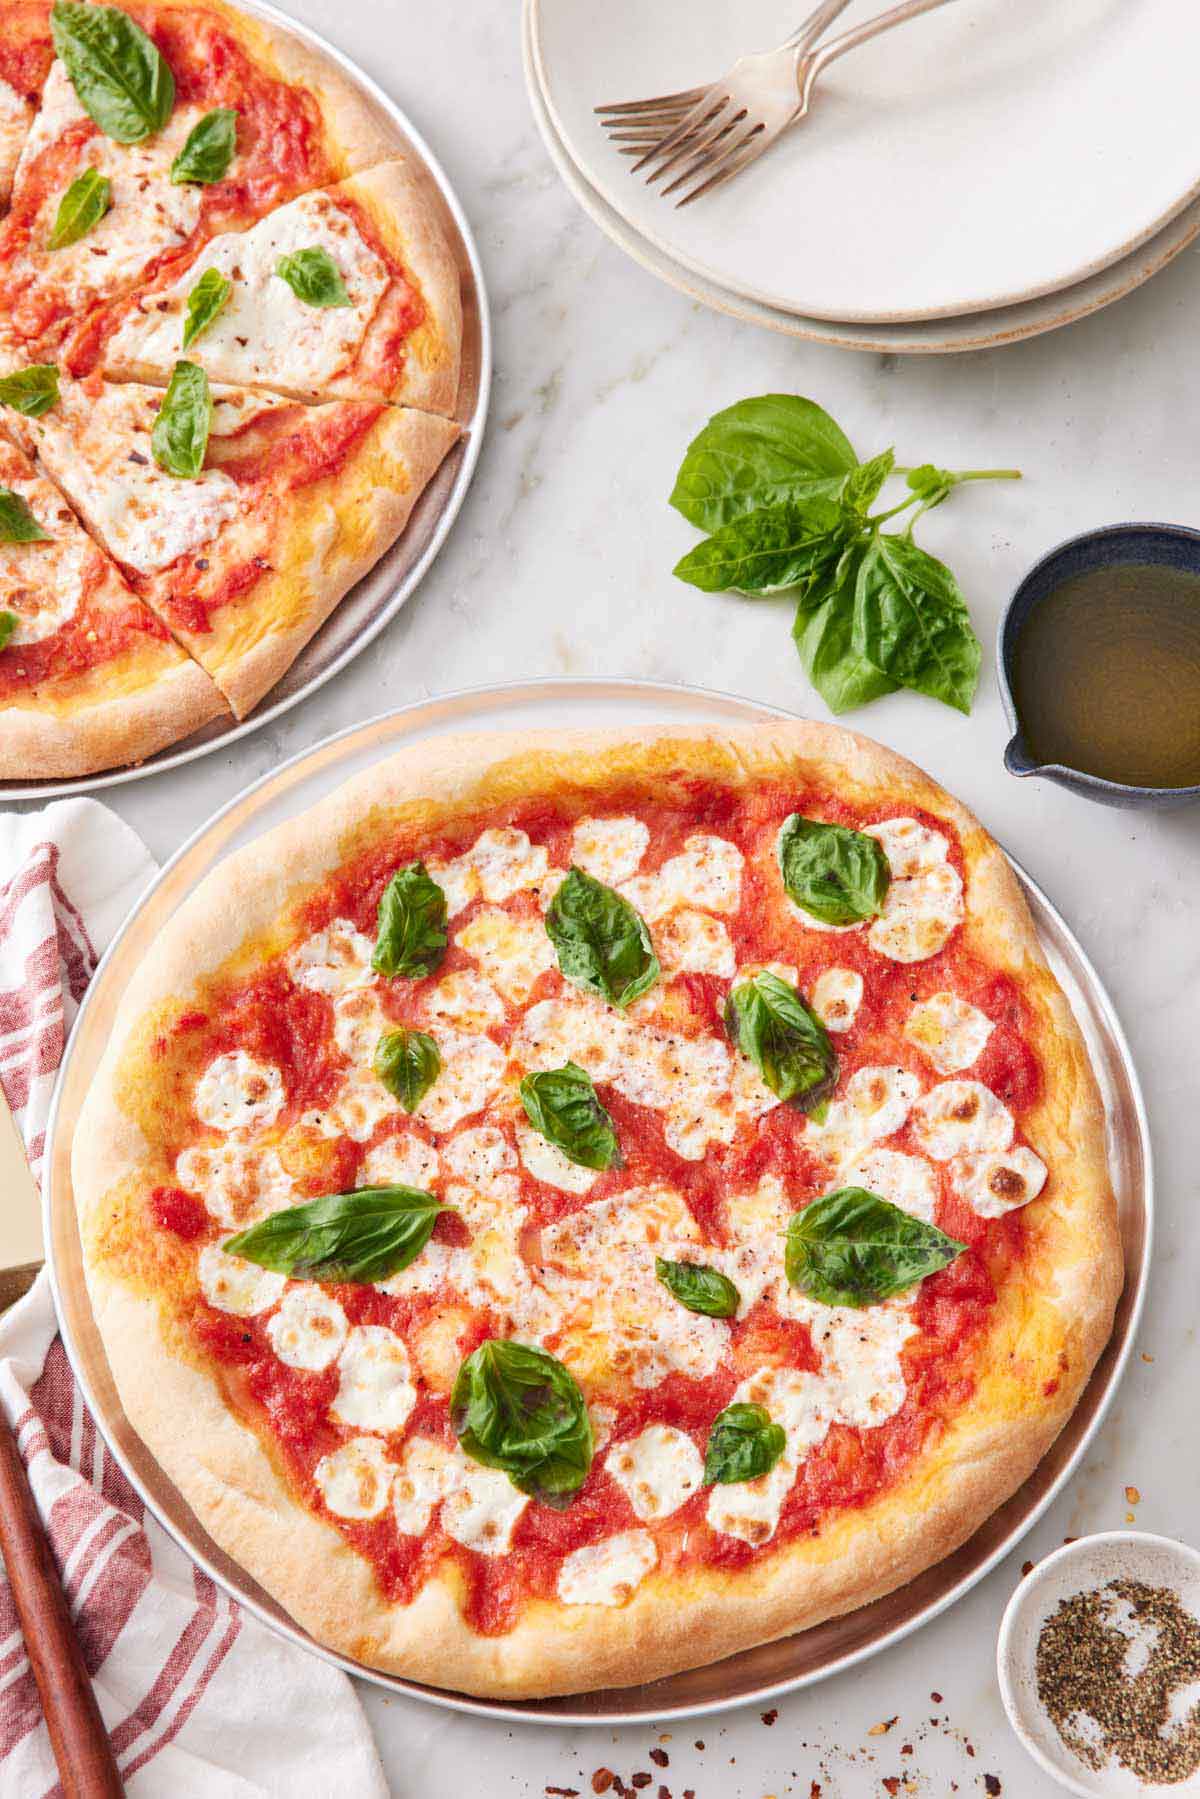 A margherita pizza topped with fresh basil leaves with a second sliced pizza in the background along with a stack of plates and forks.